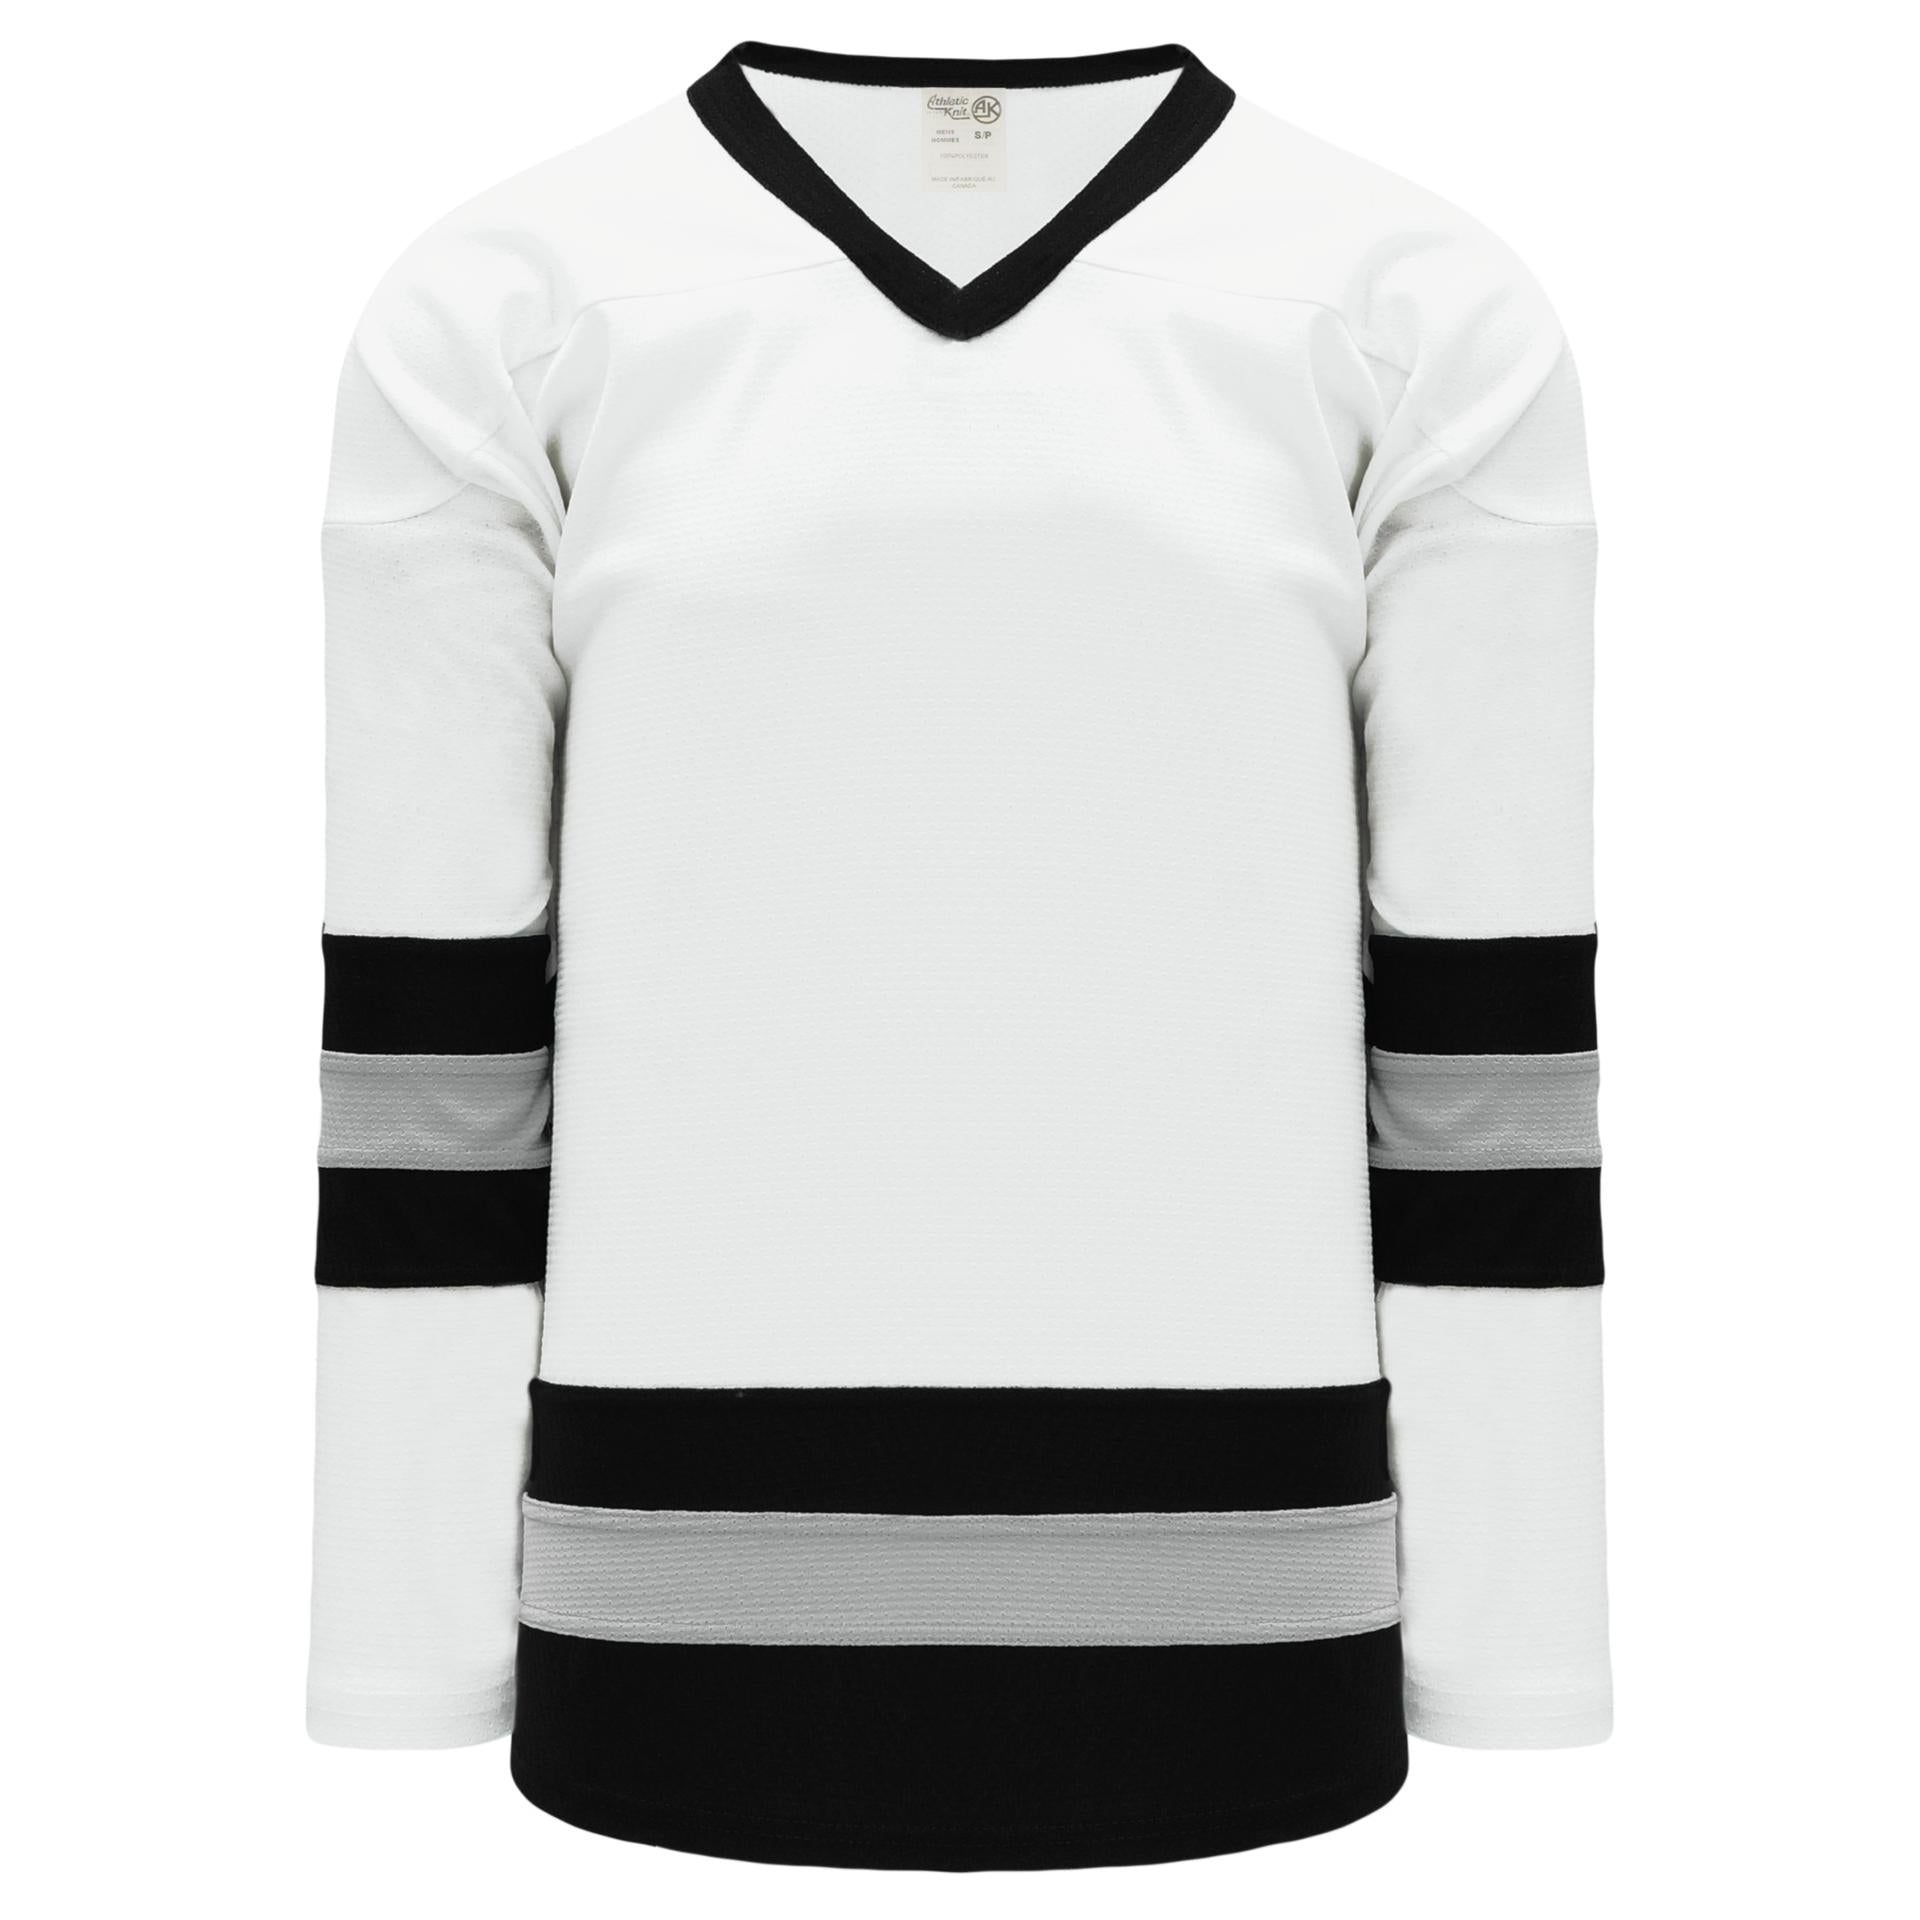 grey and white jersey